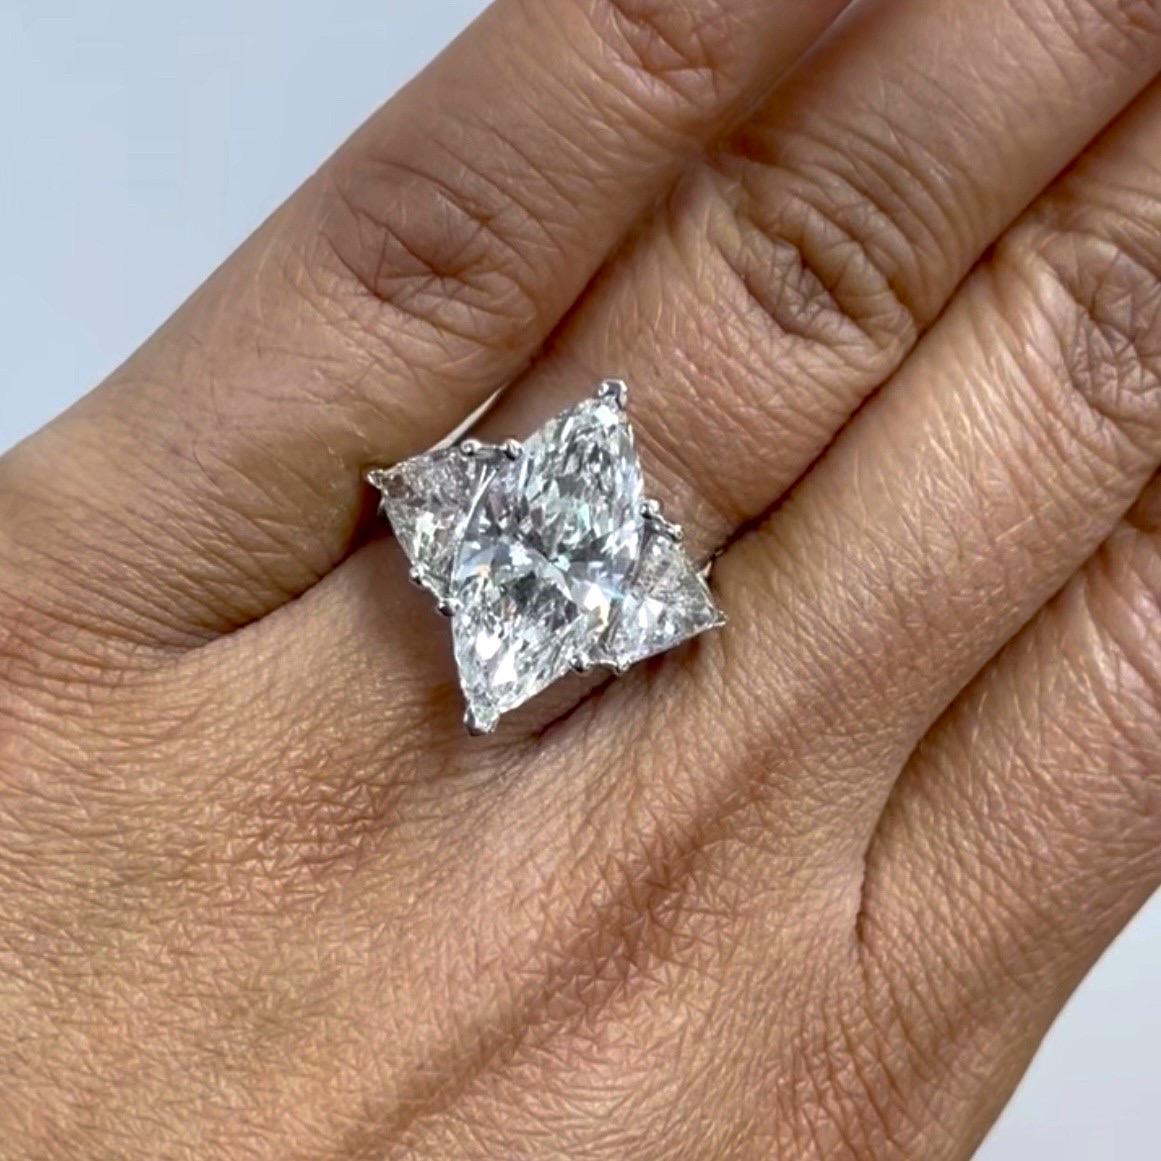 The Rumi ring is a exquisite jewel with a 5 carat Marquise which measures like at 7 - 8 carat solitaire and faces up like a H color diamond. Bright, lustrous and full of fire, this ring is showstopper and a marquise lovers dream.

Center Diamond